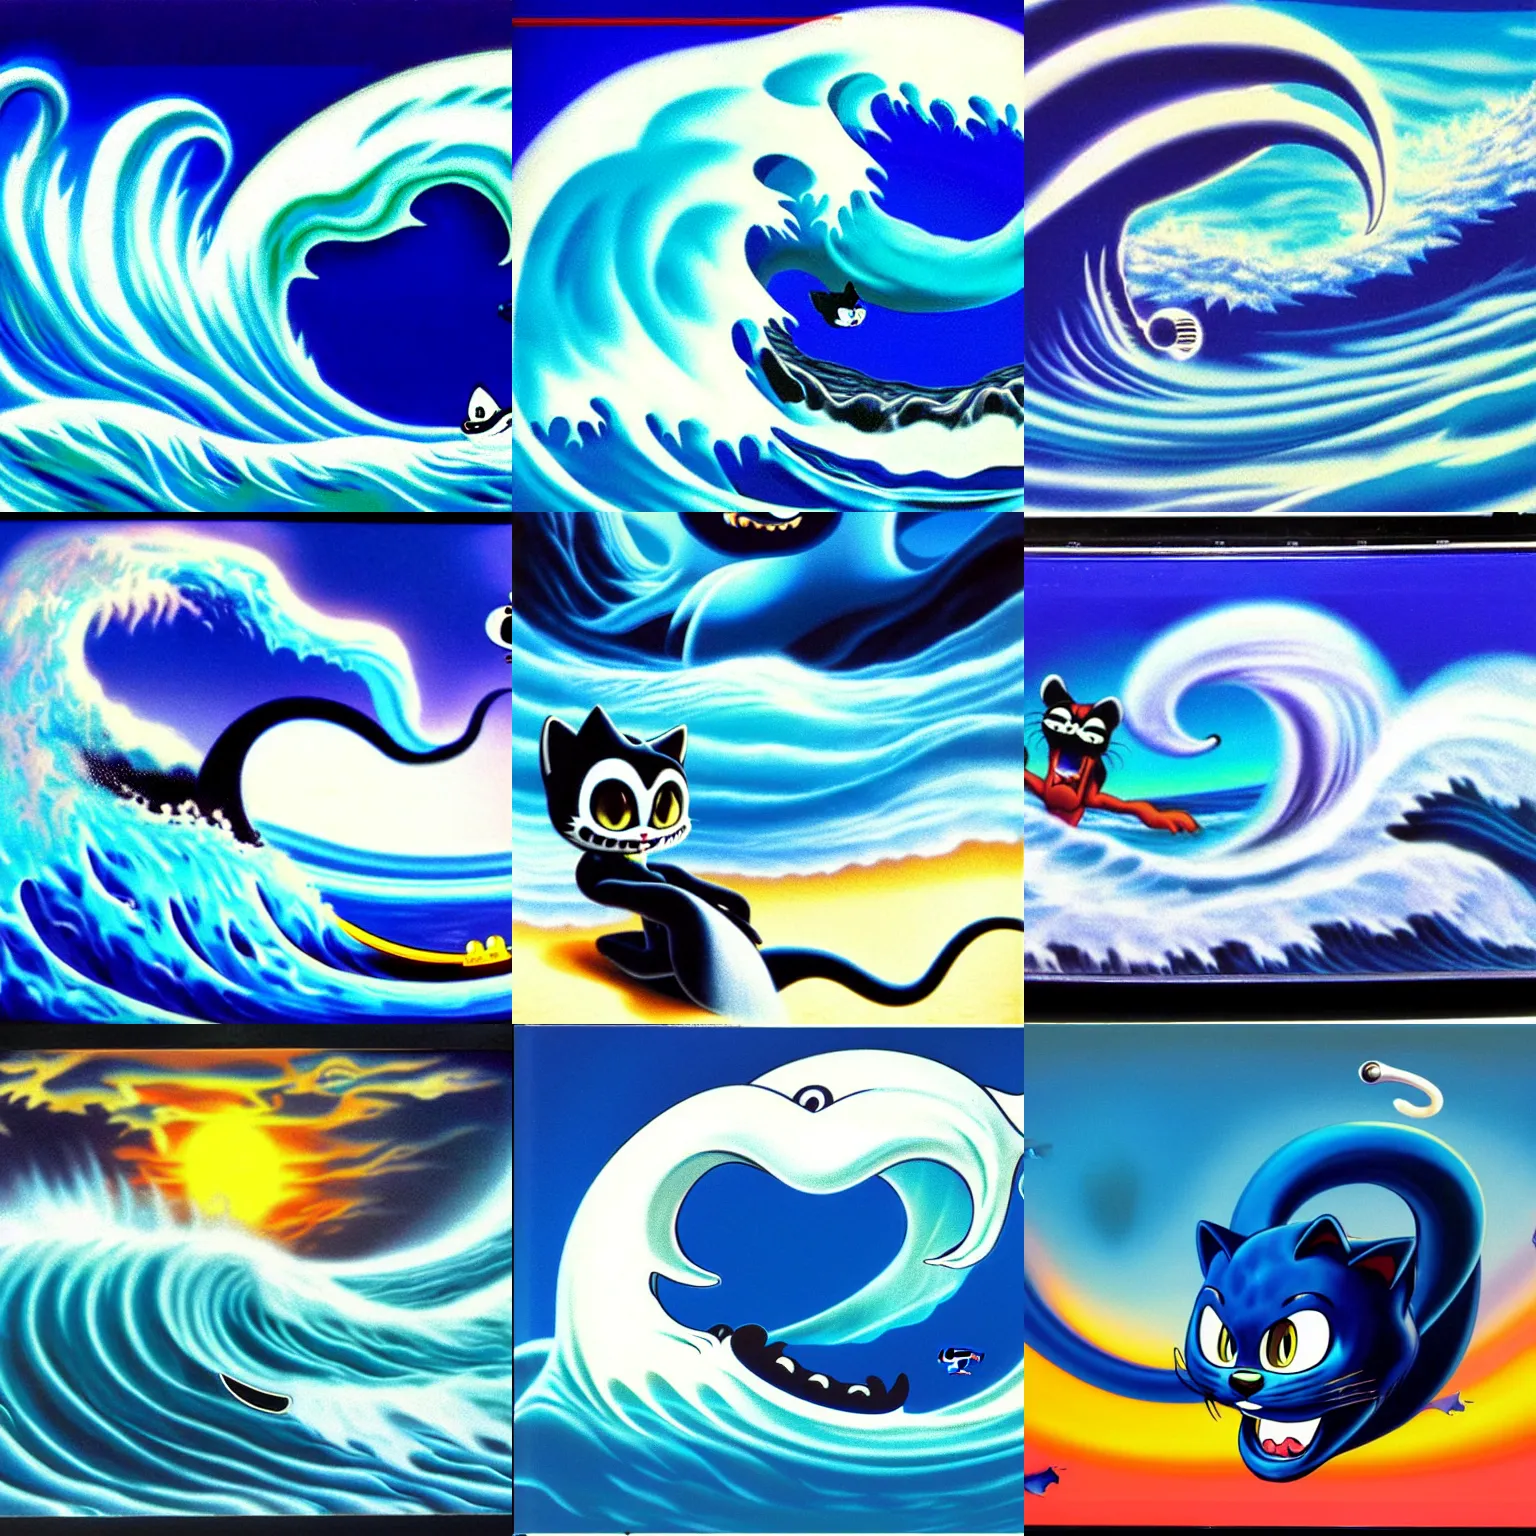 Prompt: surreal, professional, high quality airbrush art of a blue cresting ocean wave in the shape of Felix the Cat, 1990s 1992 Sega Genesis box art